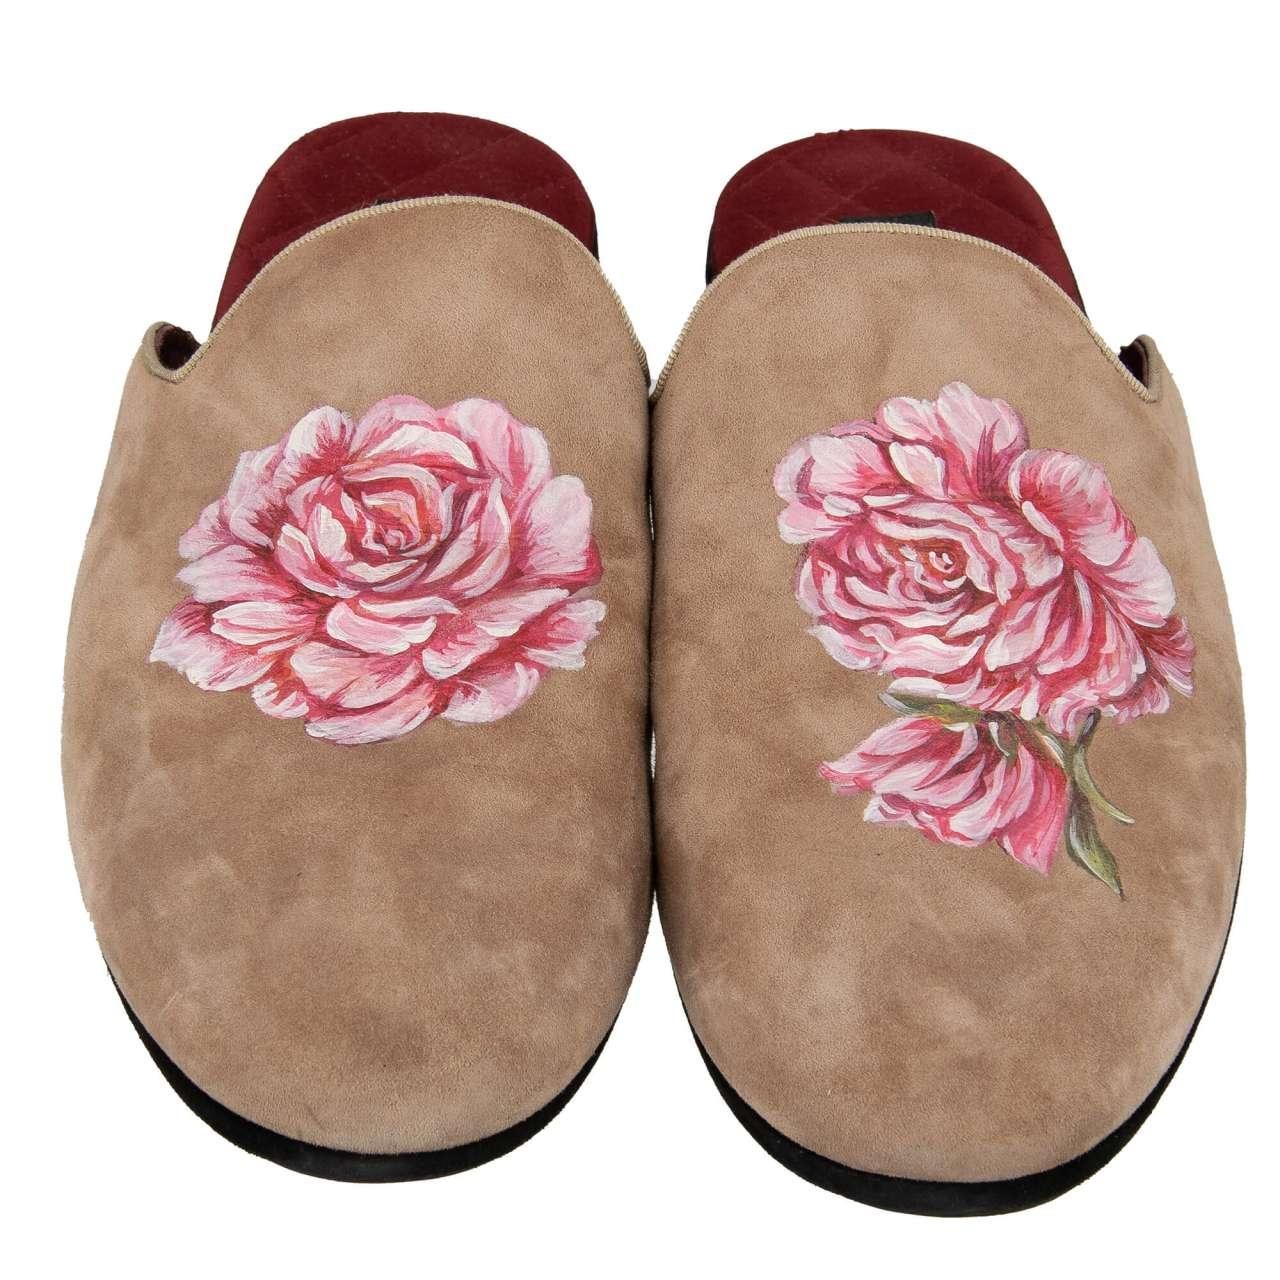 D&G - Rose Painted Suede Shoes Slipper YOUNG POPE Beige 44 UK 10 US 11 In Excellent Condition For Sale In Erkrath, DE